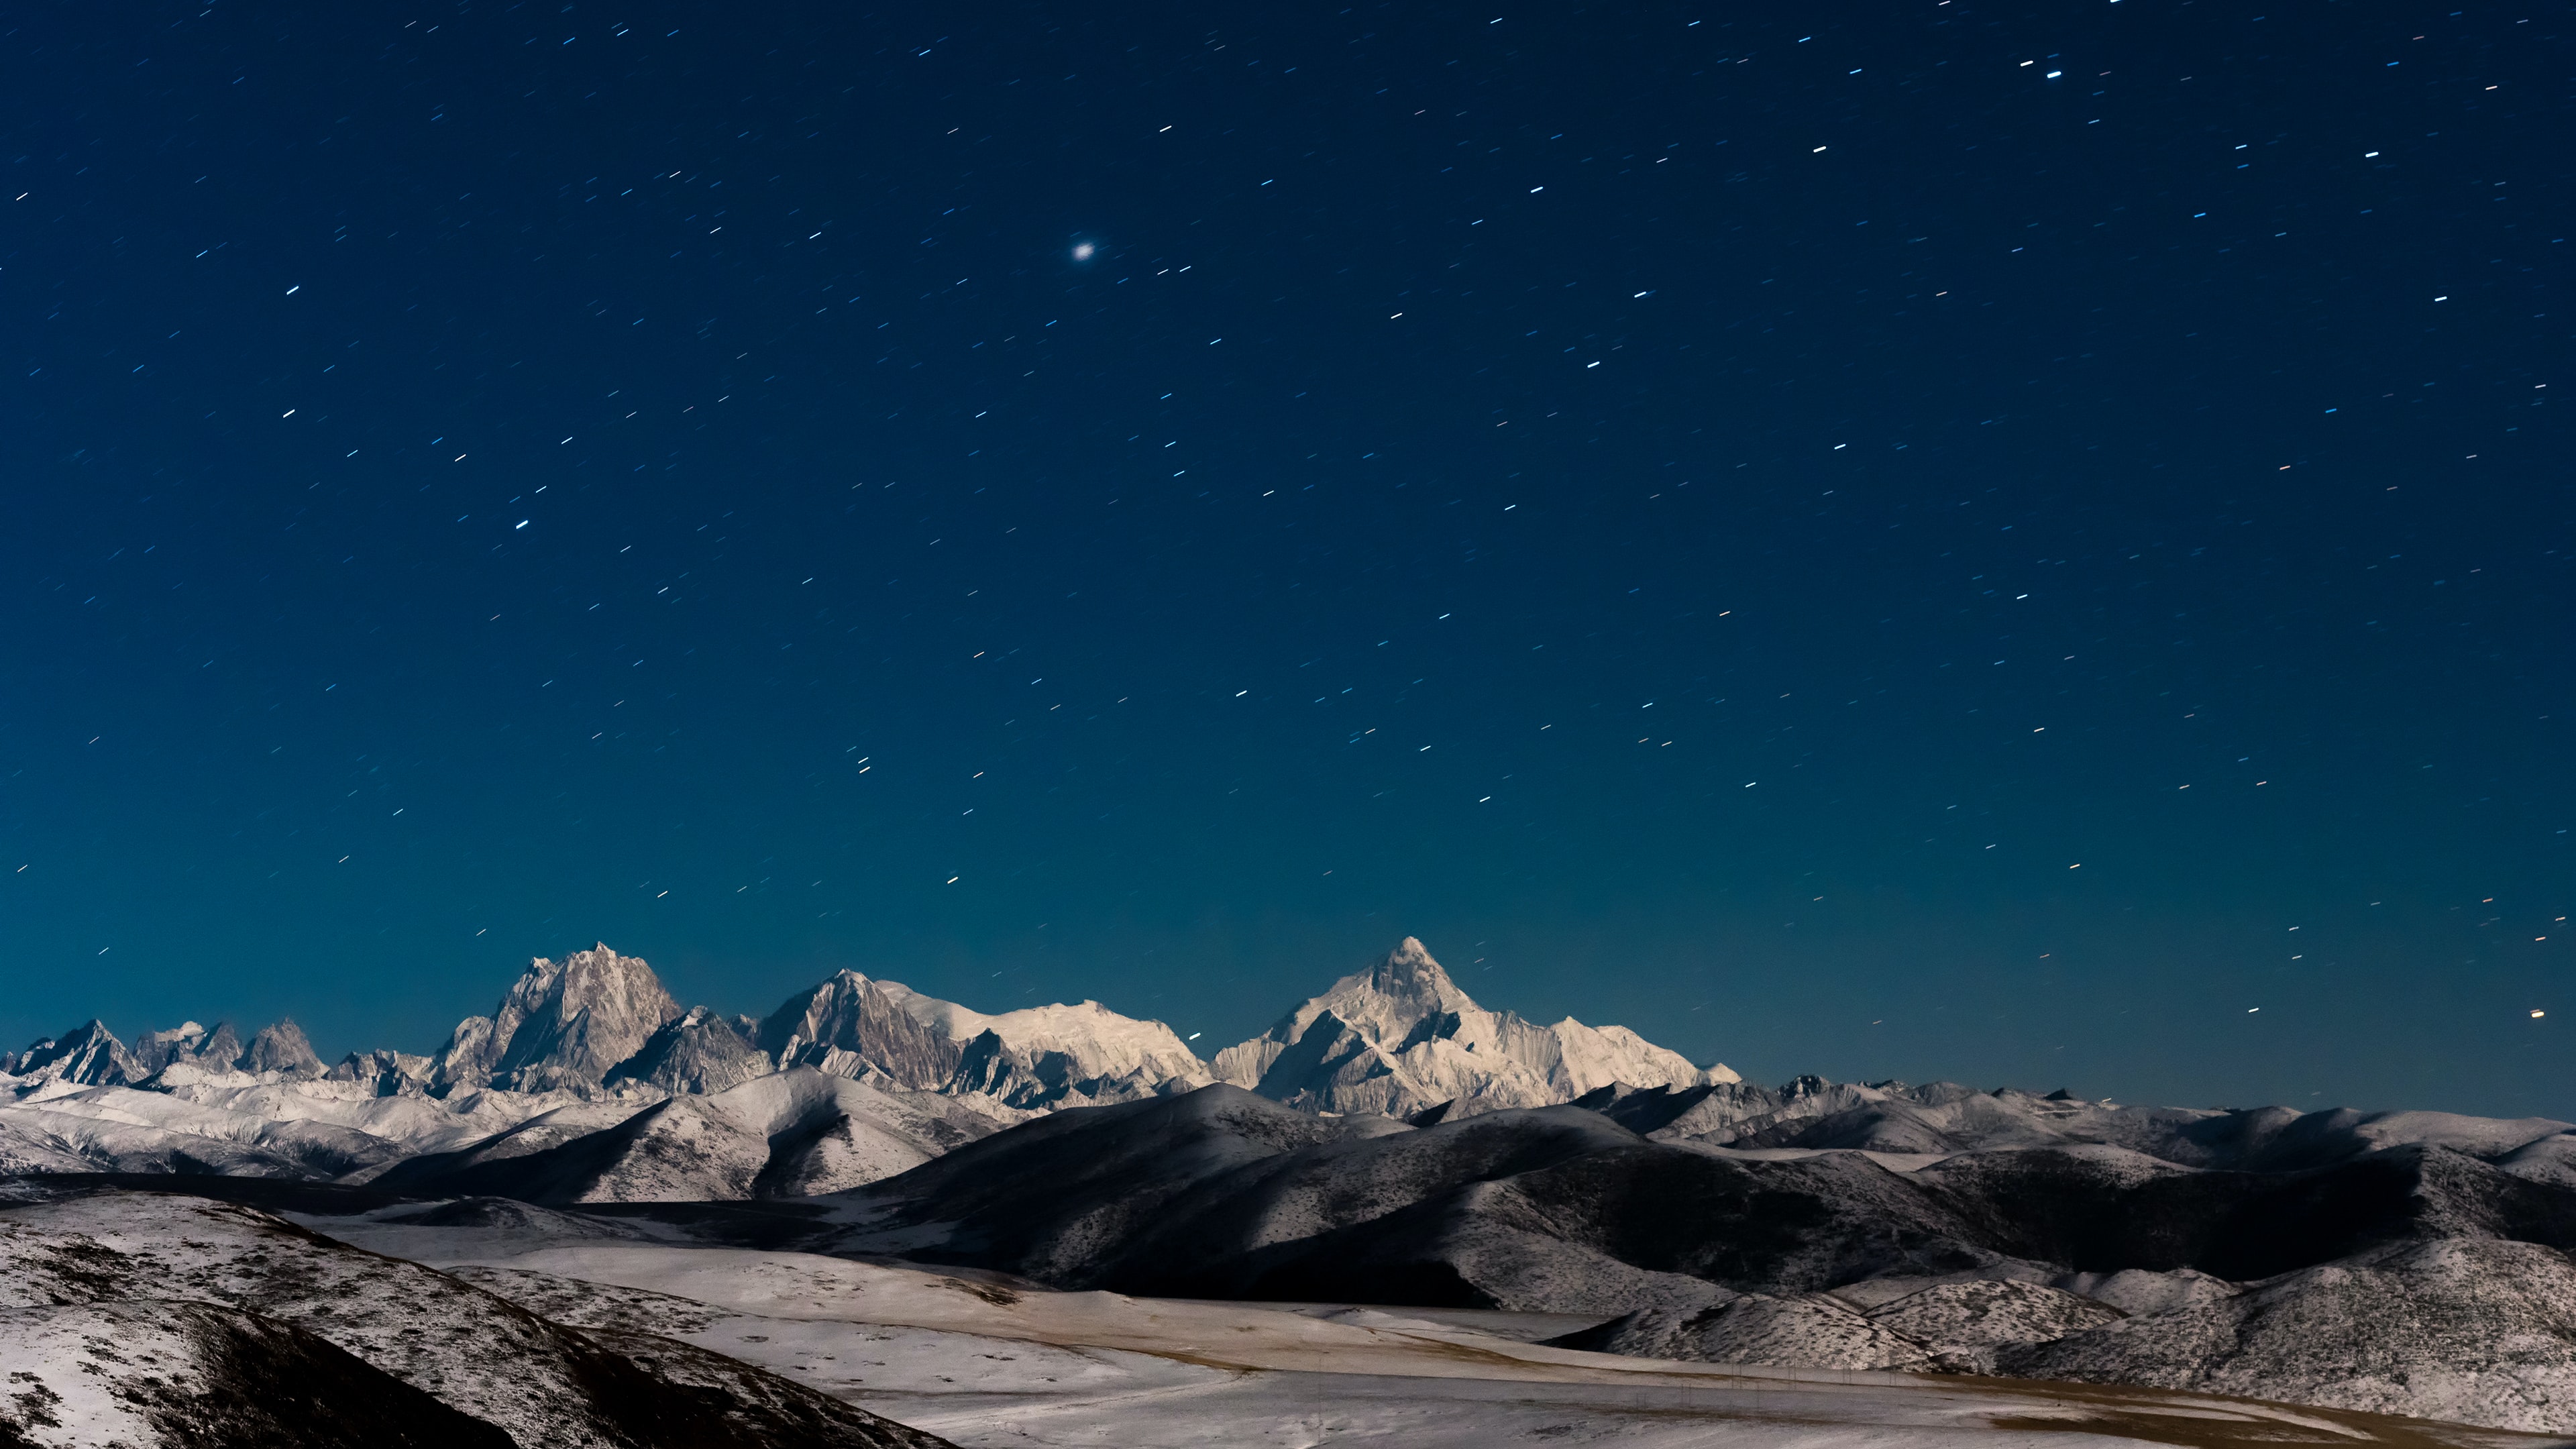 General 3840x2160 landscape stars snow mountains starry night nature low light